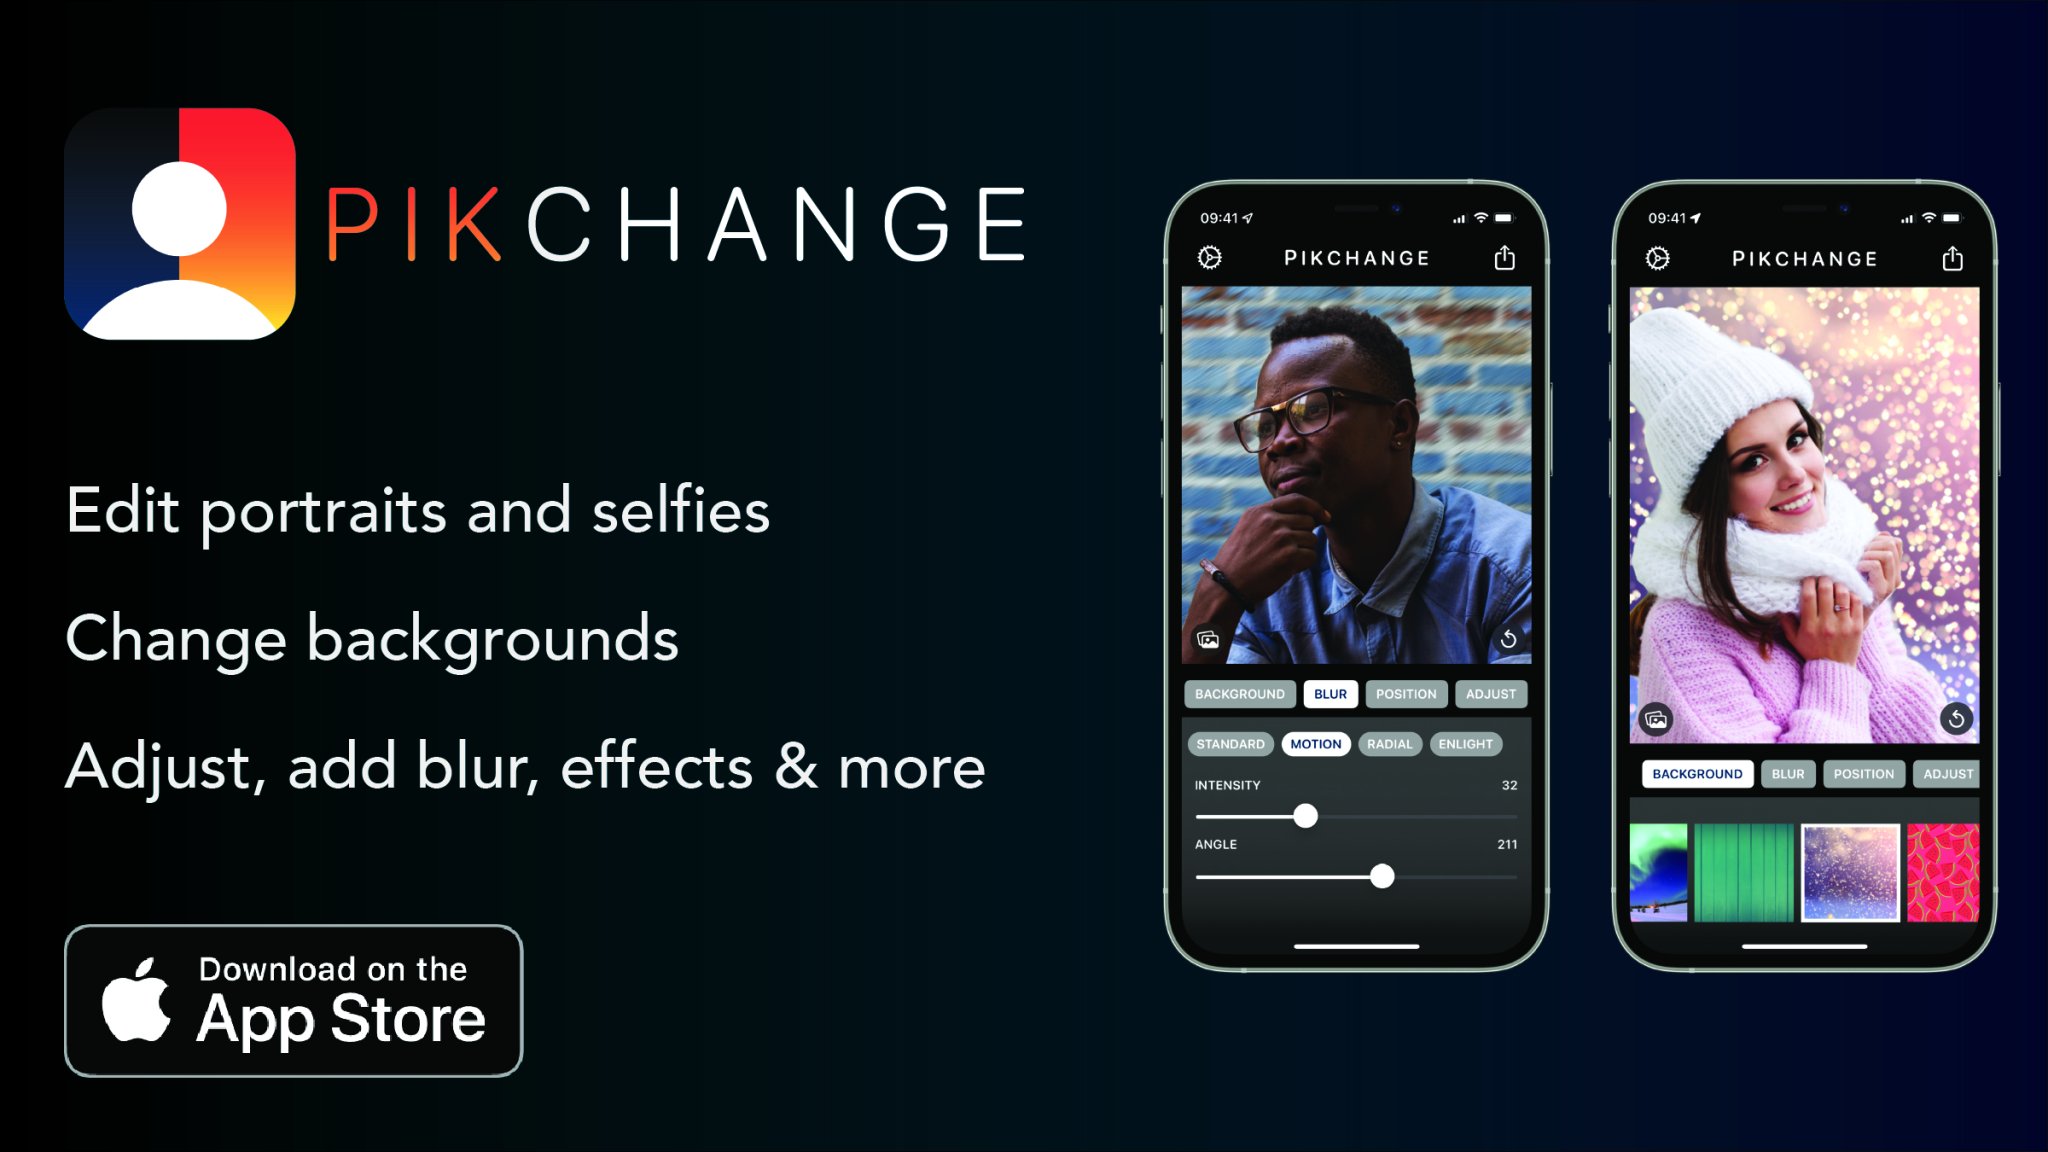 Pikchange is A Perfect Way to Make Selfies and Portraits Even Better